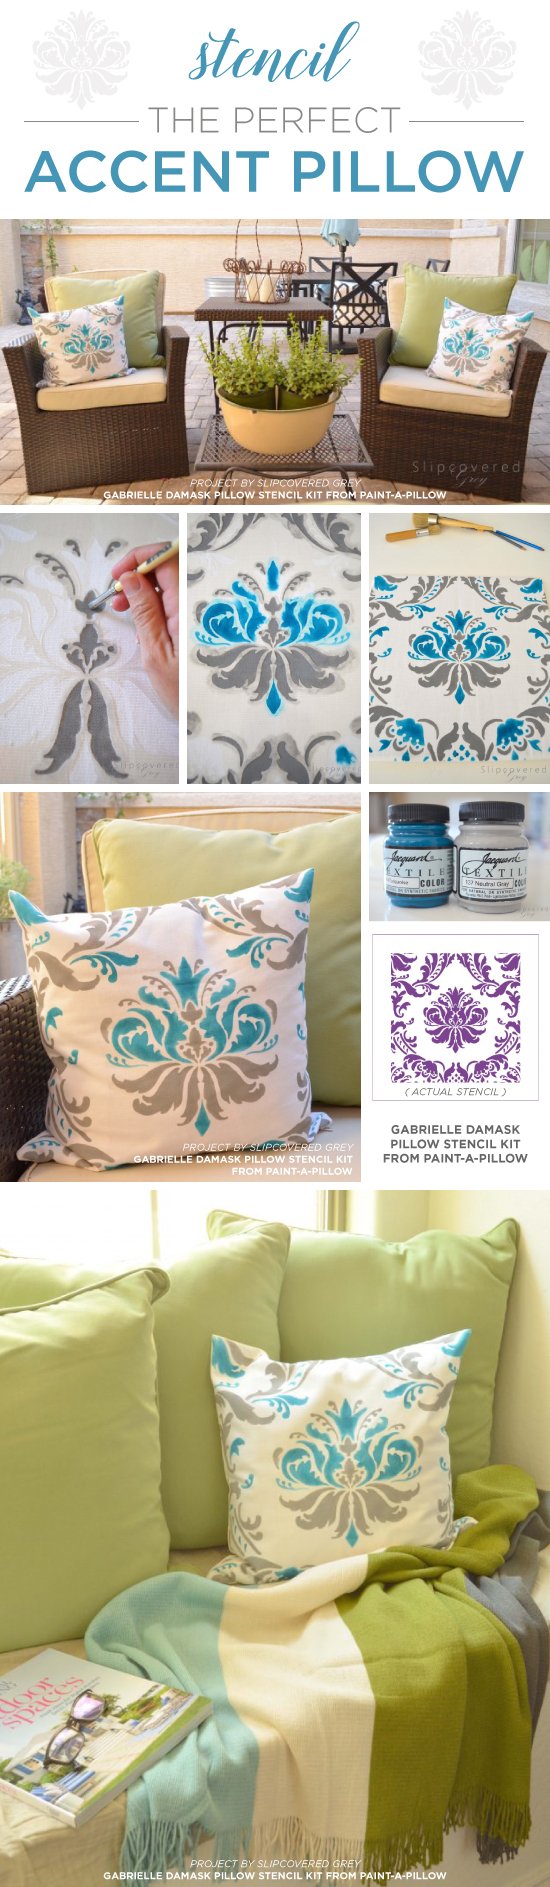 Cutting Edge Stencils shares how to stencil a DIY accent pillow using the Gabrielle Damask pattern. http://www.cuttingedgestencils.com/gabrielle-damask-stencils-paint-a-pillow-kit.html